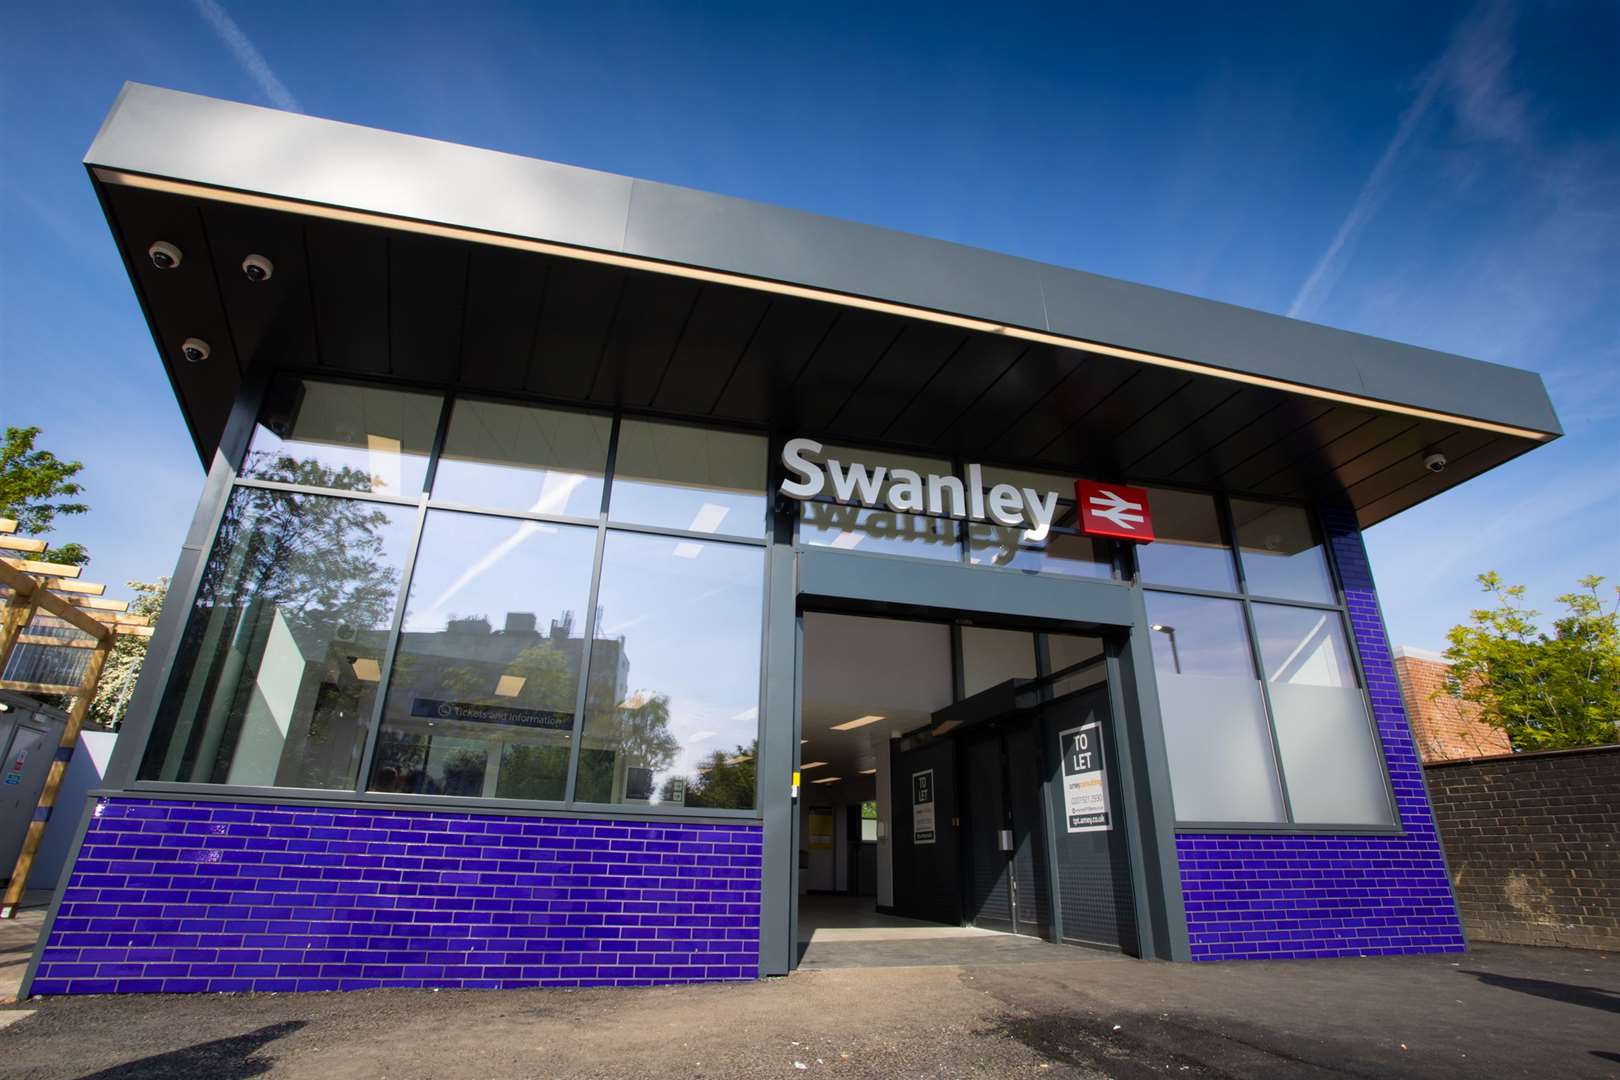 The new ticket office at Swanley station that opened in May. Picture: Andy Jones/Southeastern